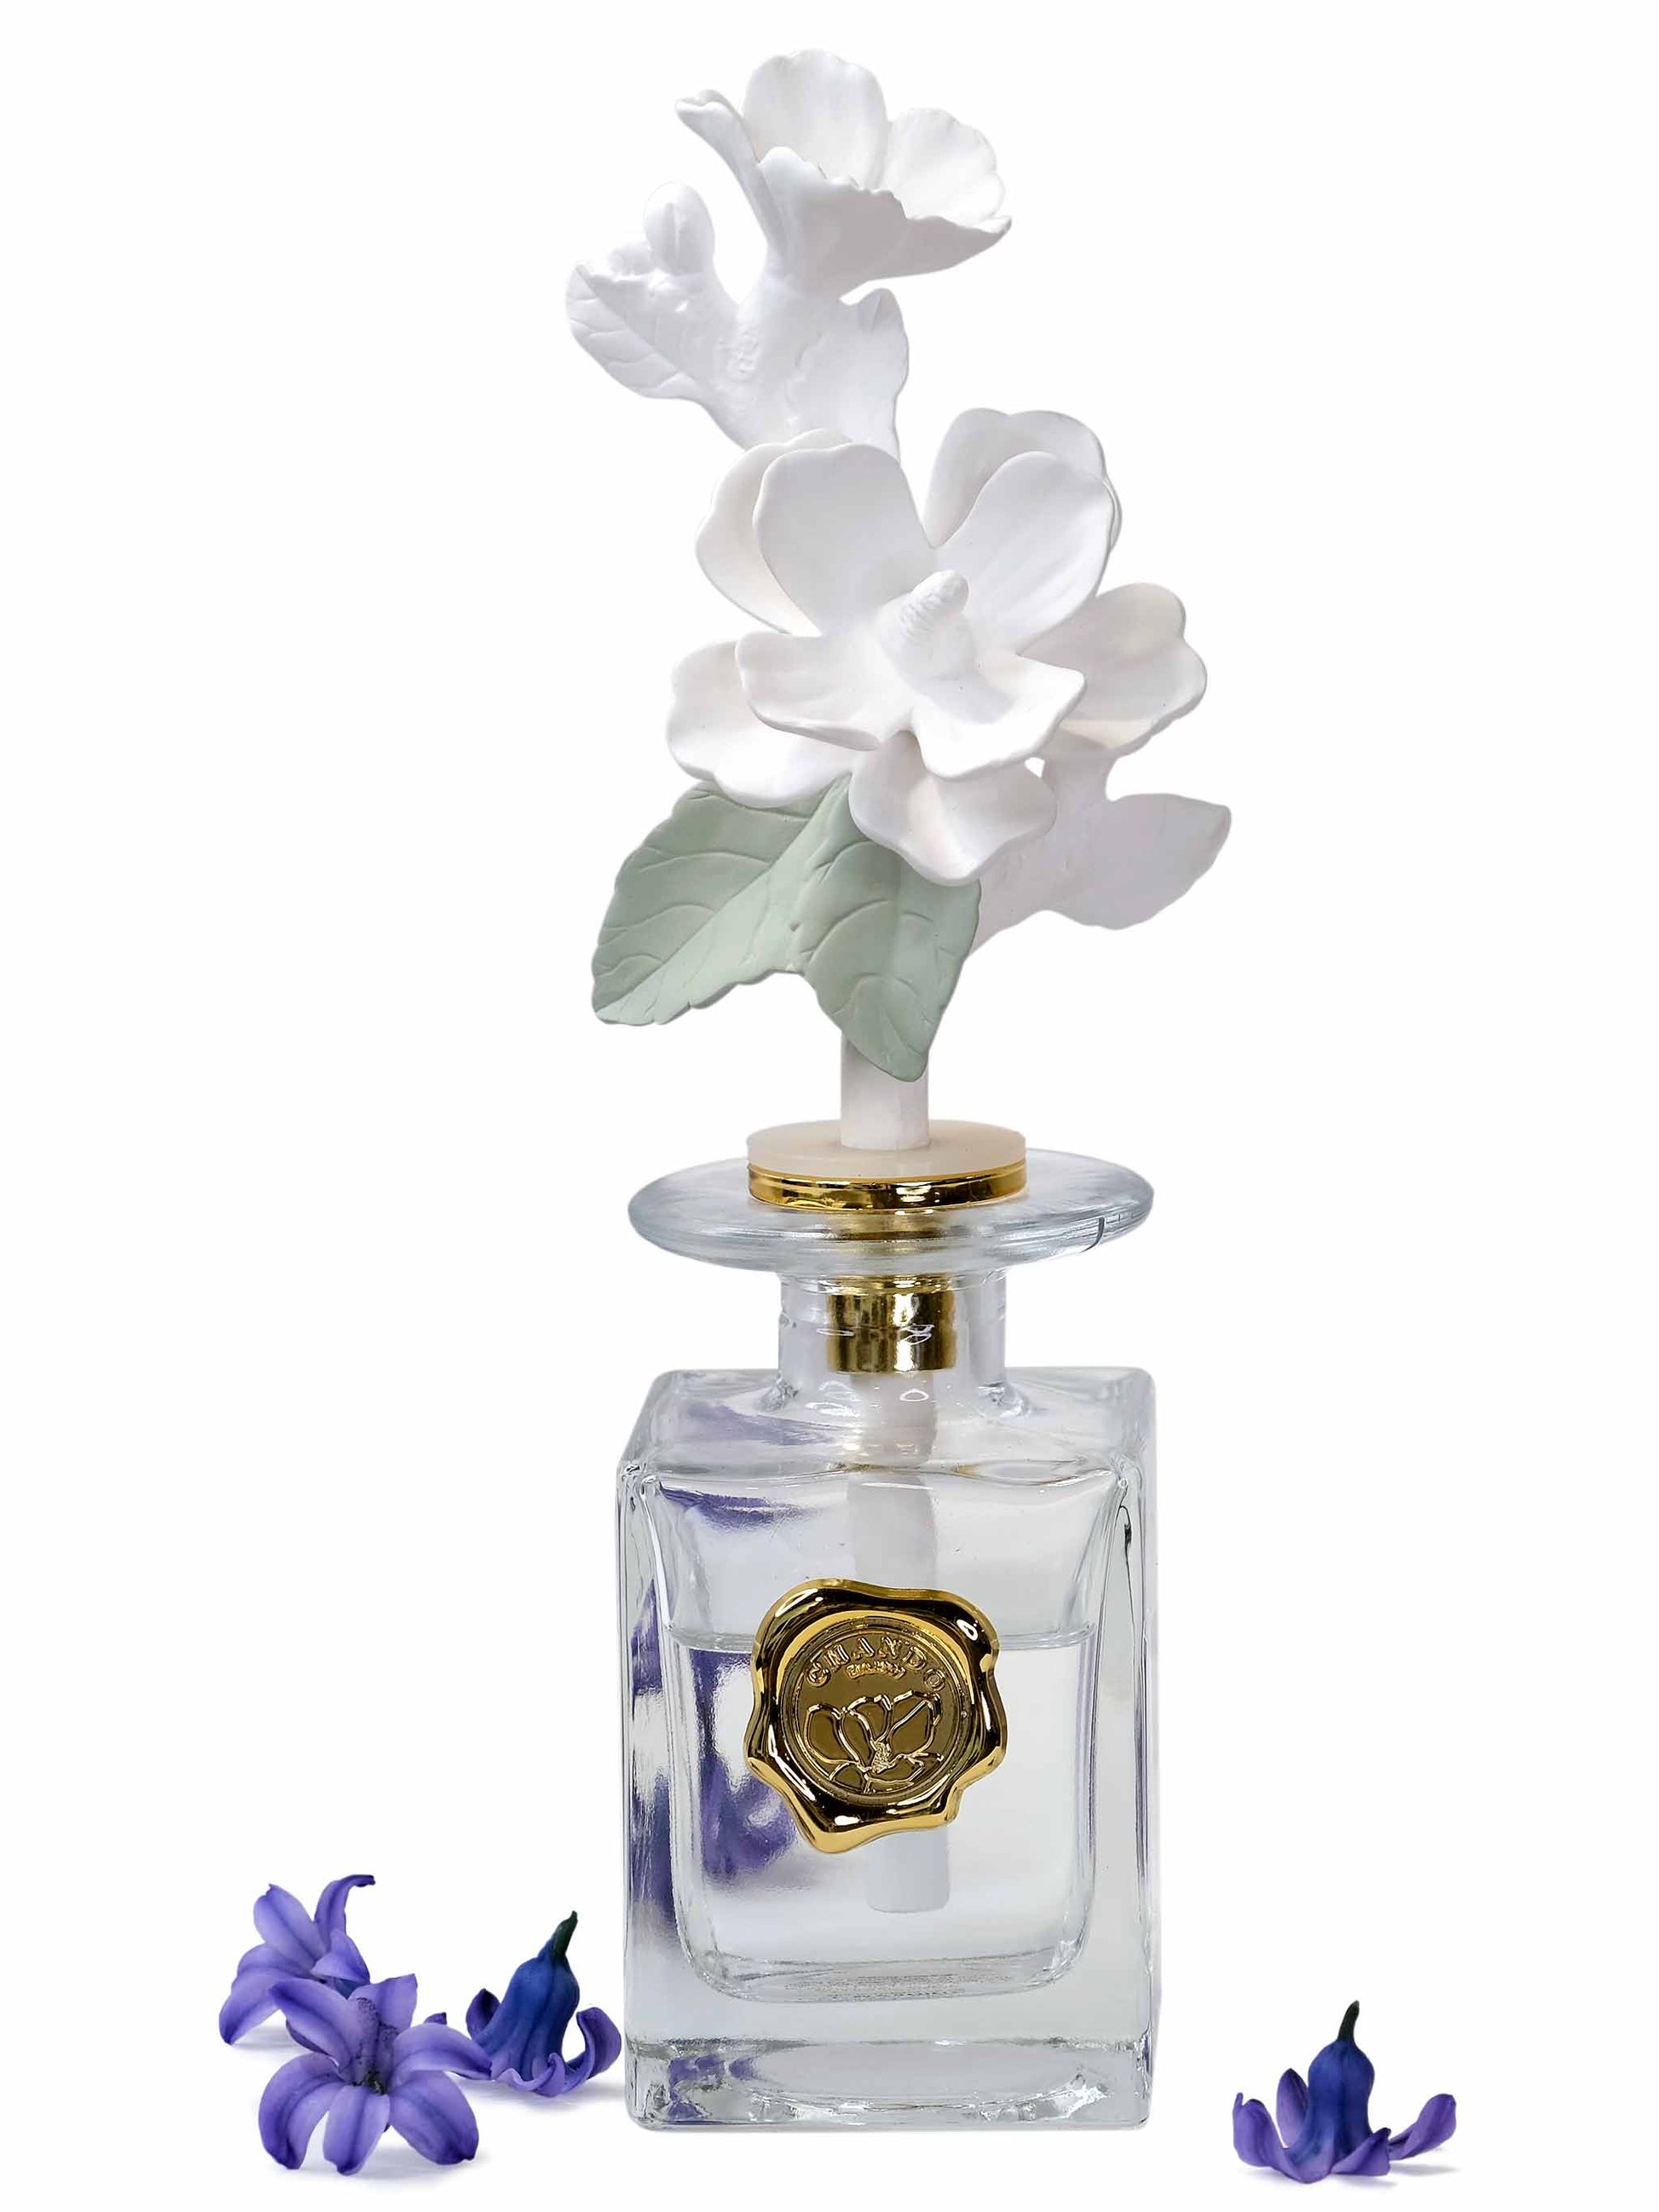 Porcelain Oil Diffuser Hibiscus & Bluebell Reusable by Chando 100ml